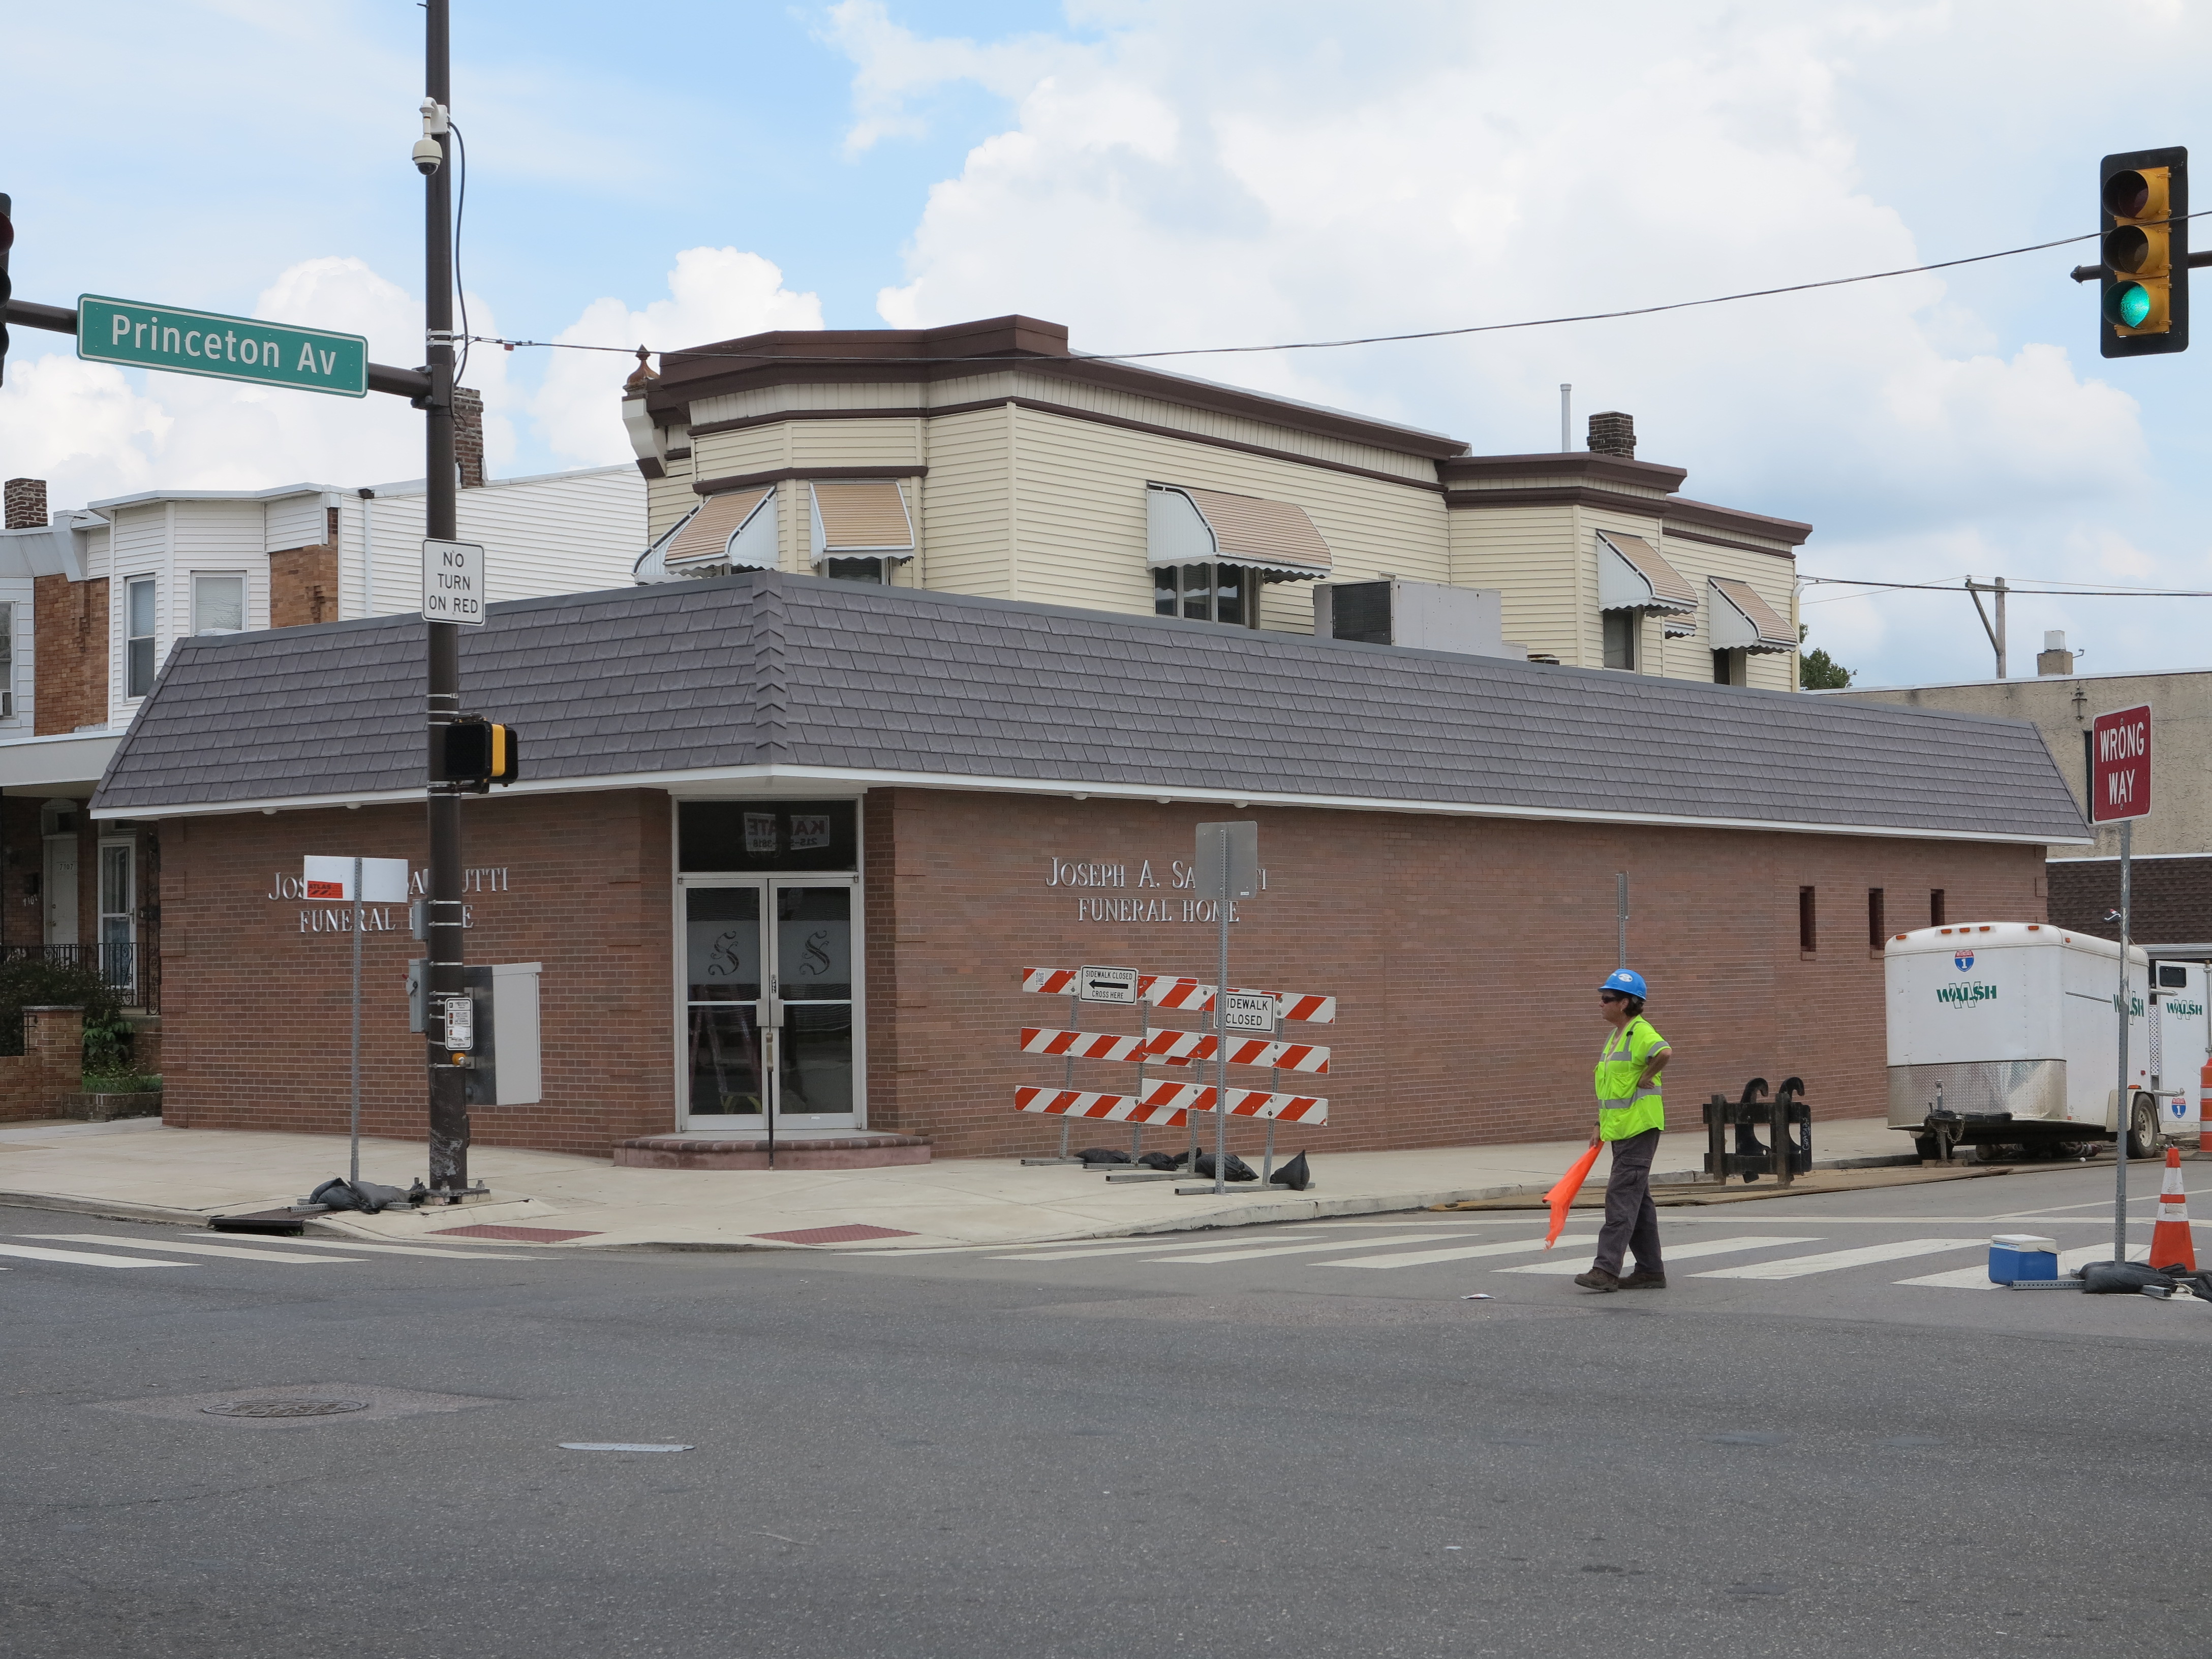 Sannutti Funeral Home went from stucco to brick in the last year.